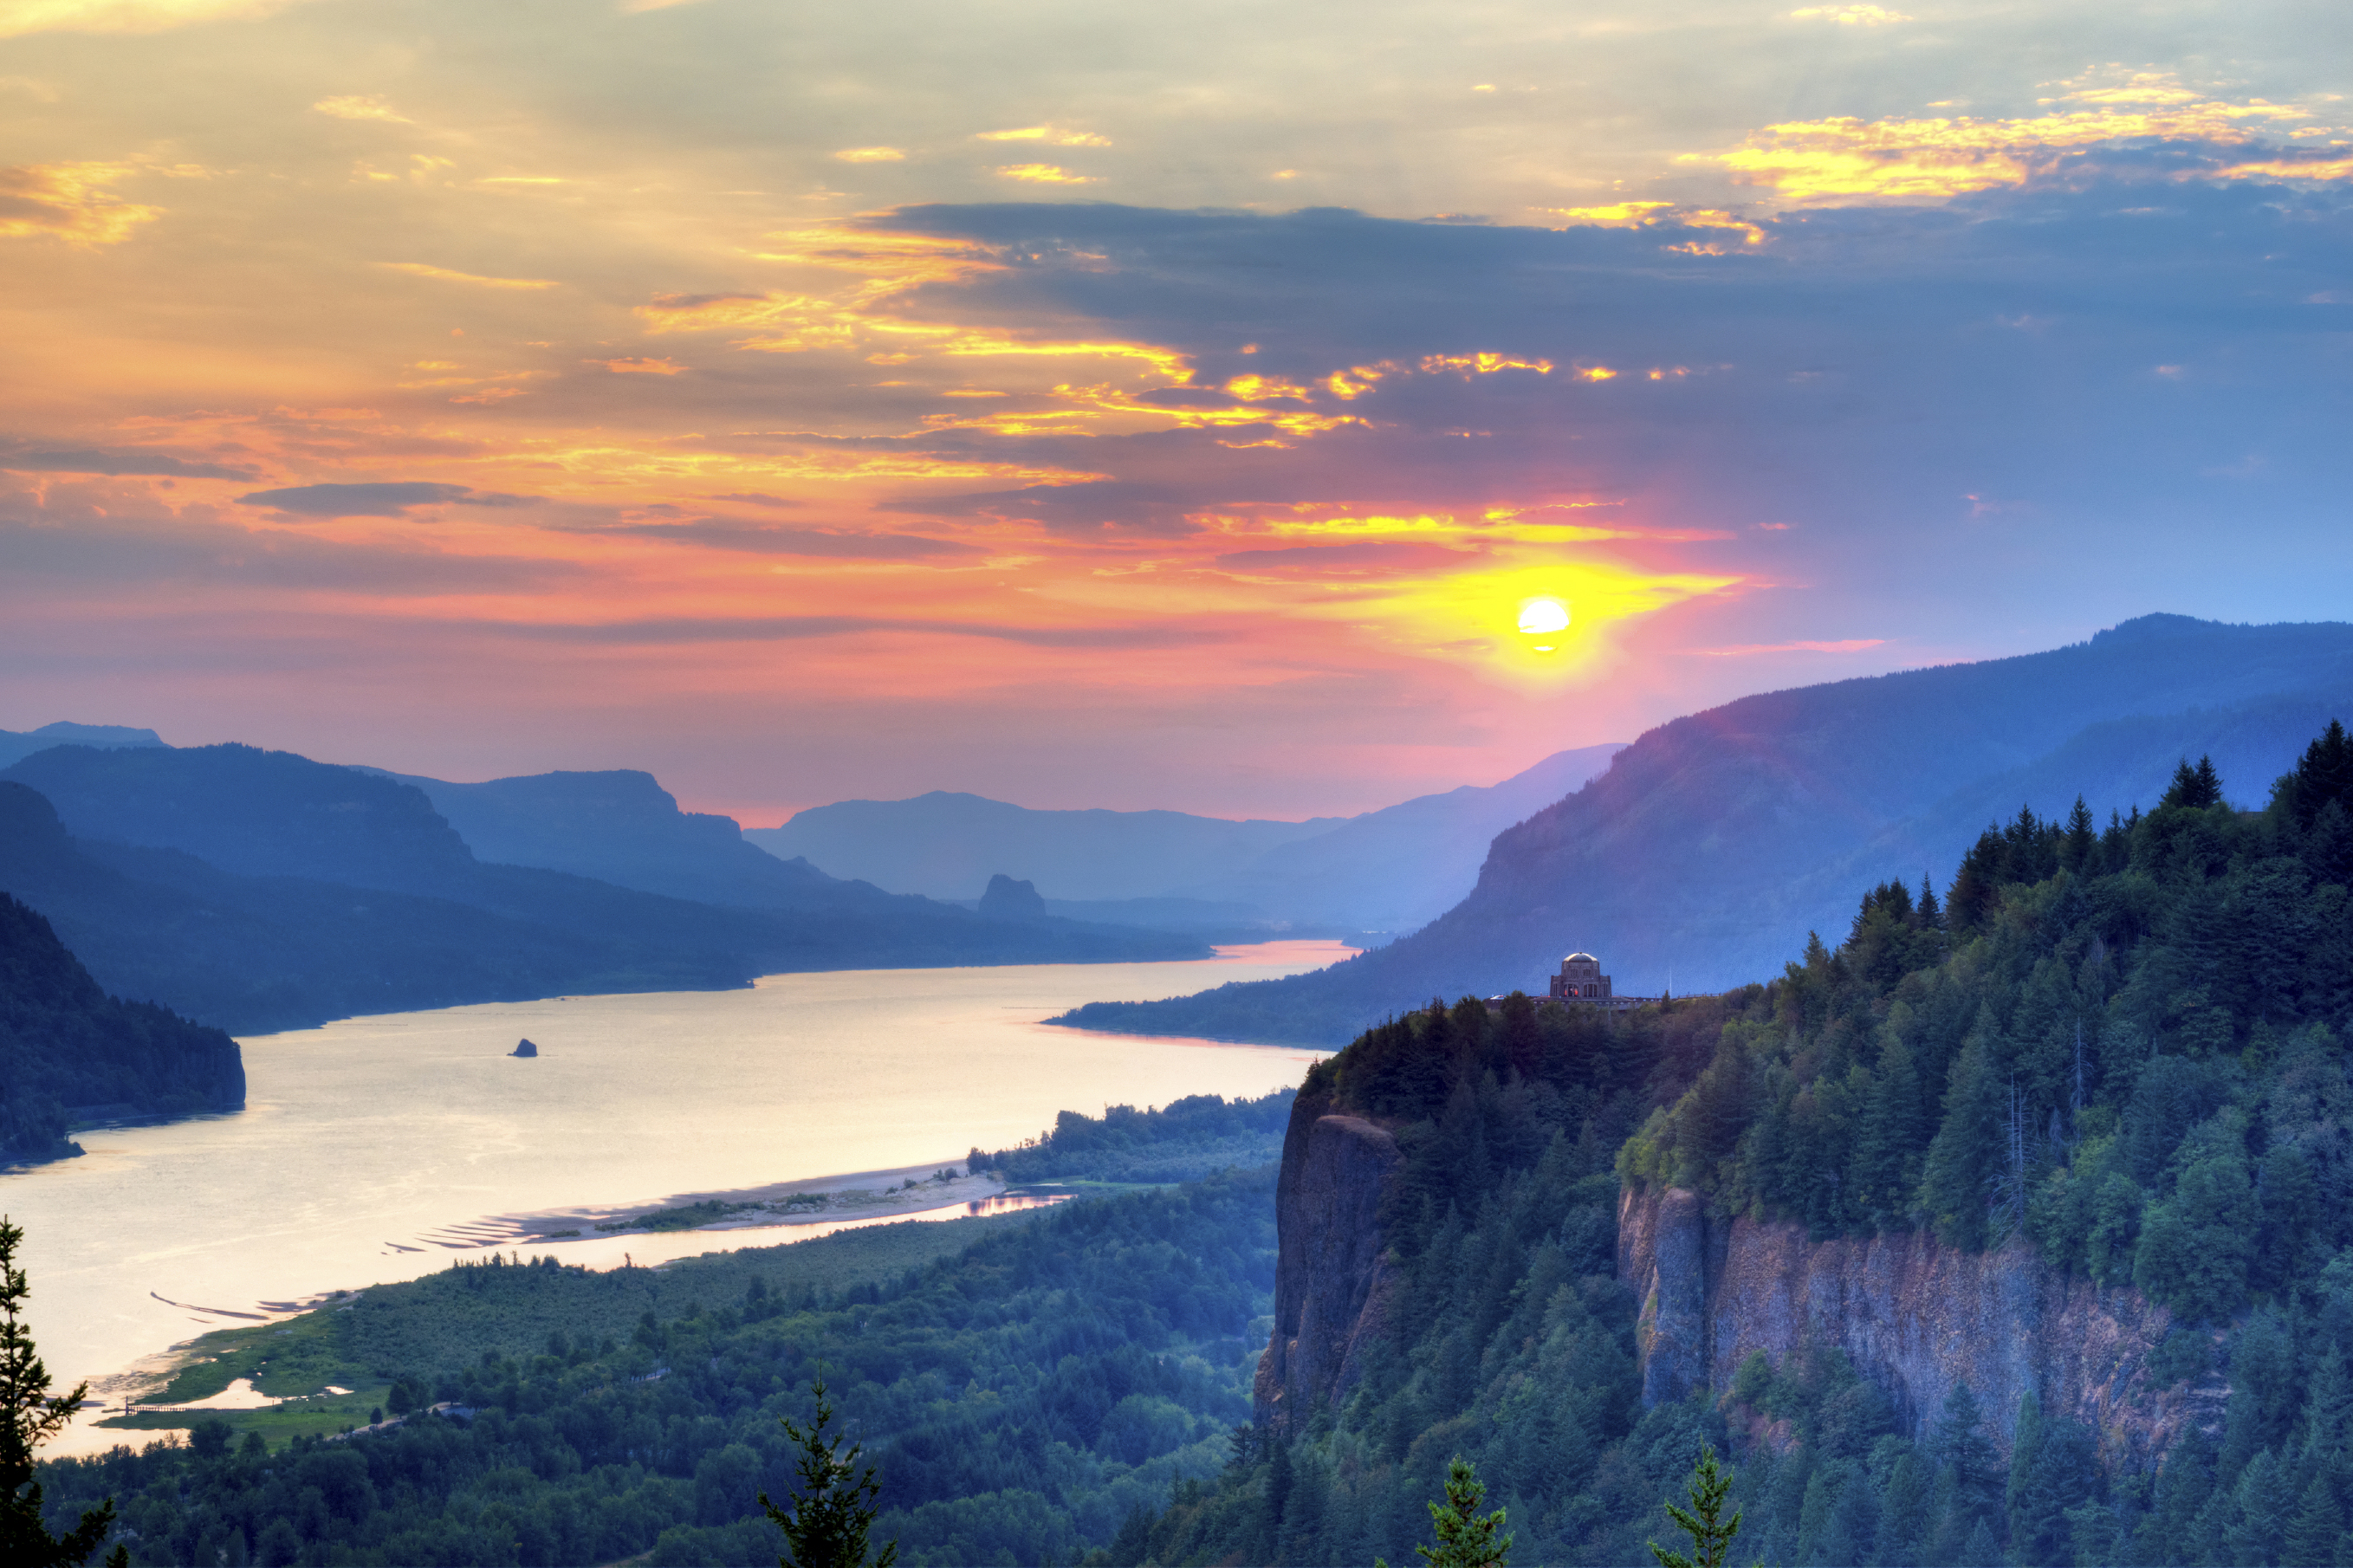 Columbia River Gorge - Living 503 - Your Portand-Vancouver Area